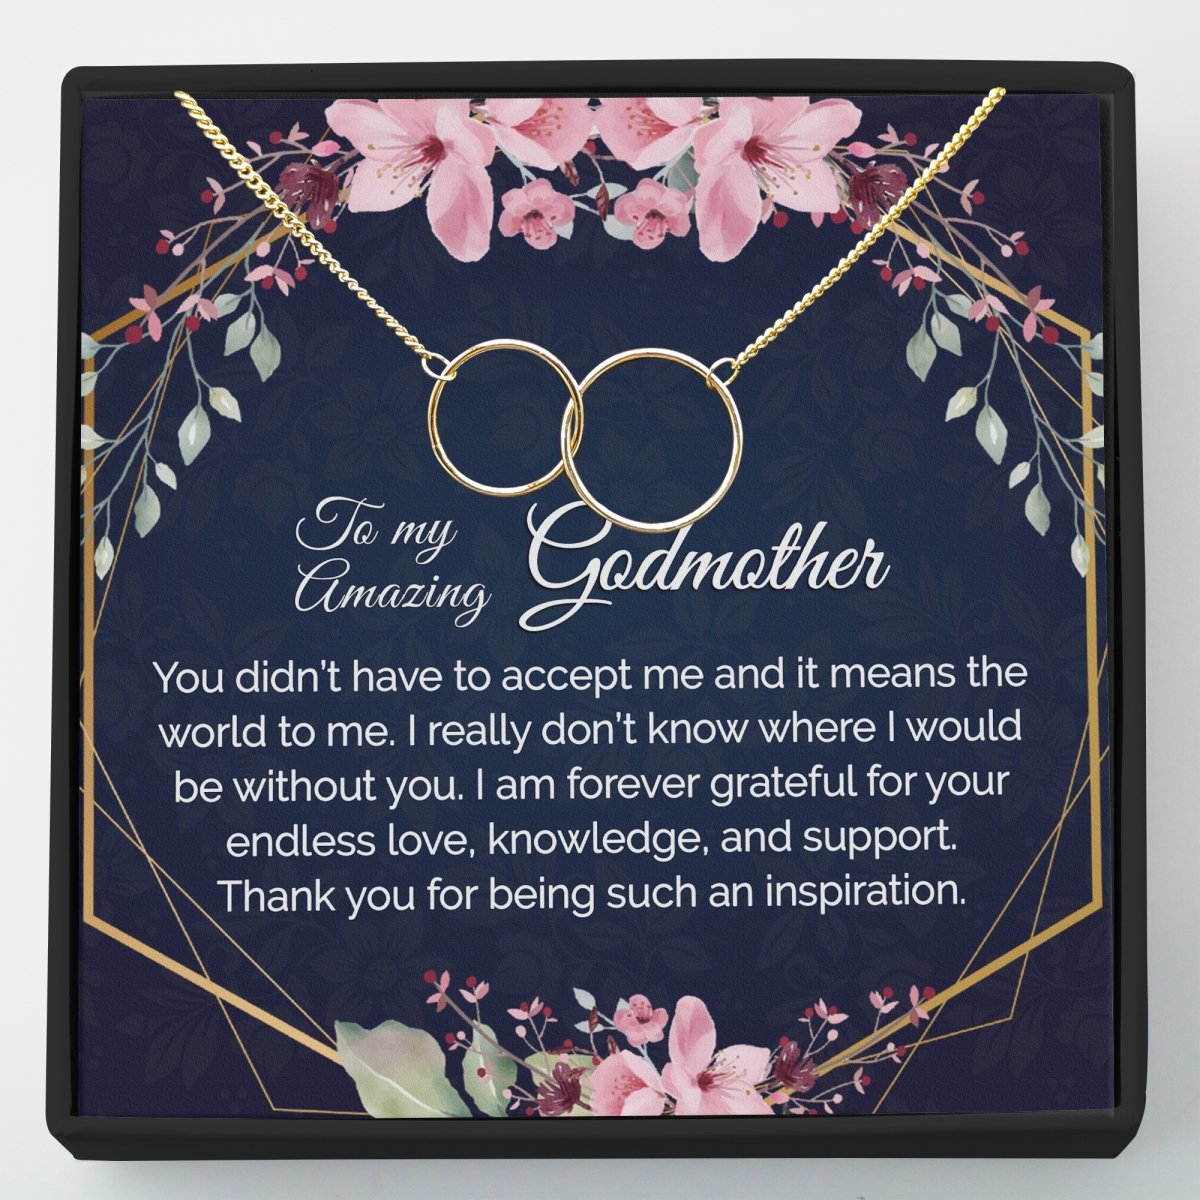 Gift for Godmother - Interlocking Circles Necklace - Meaningful Cards